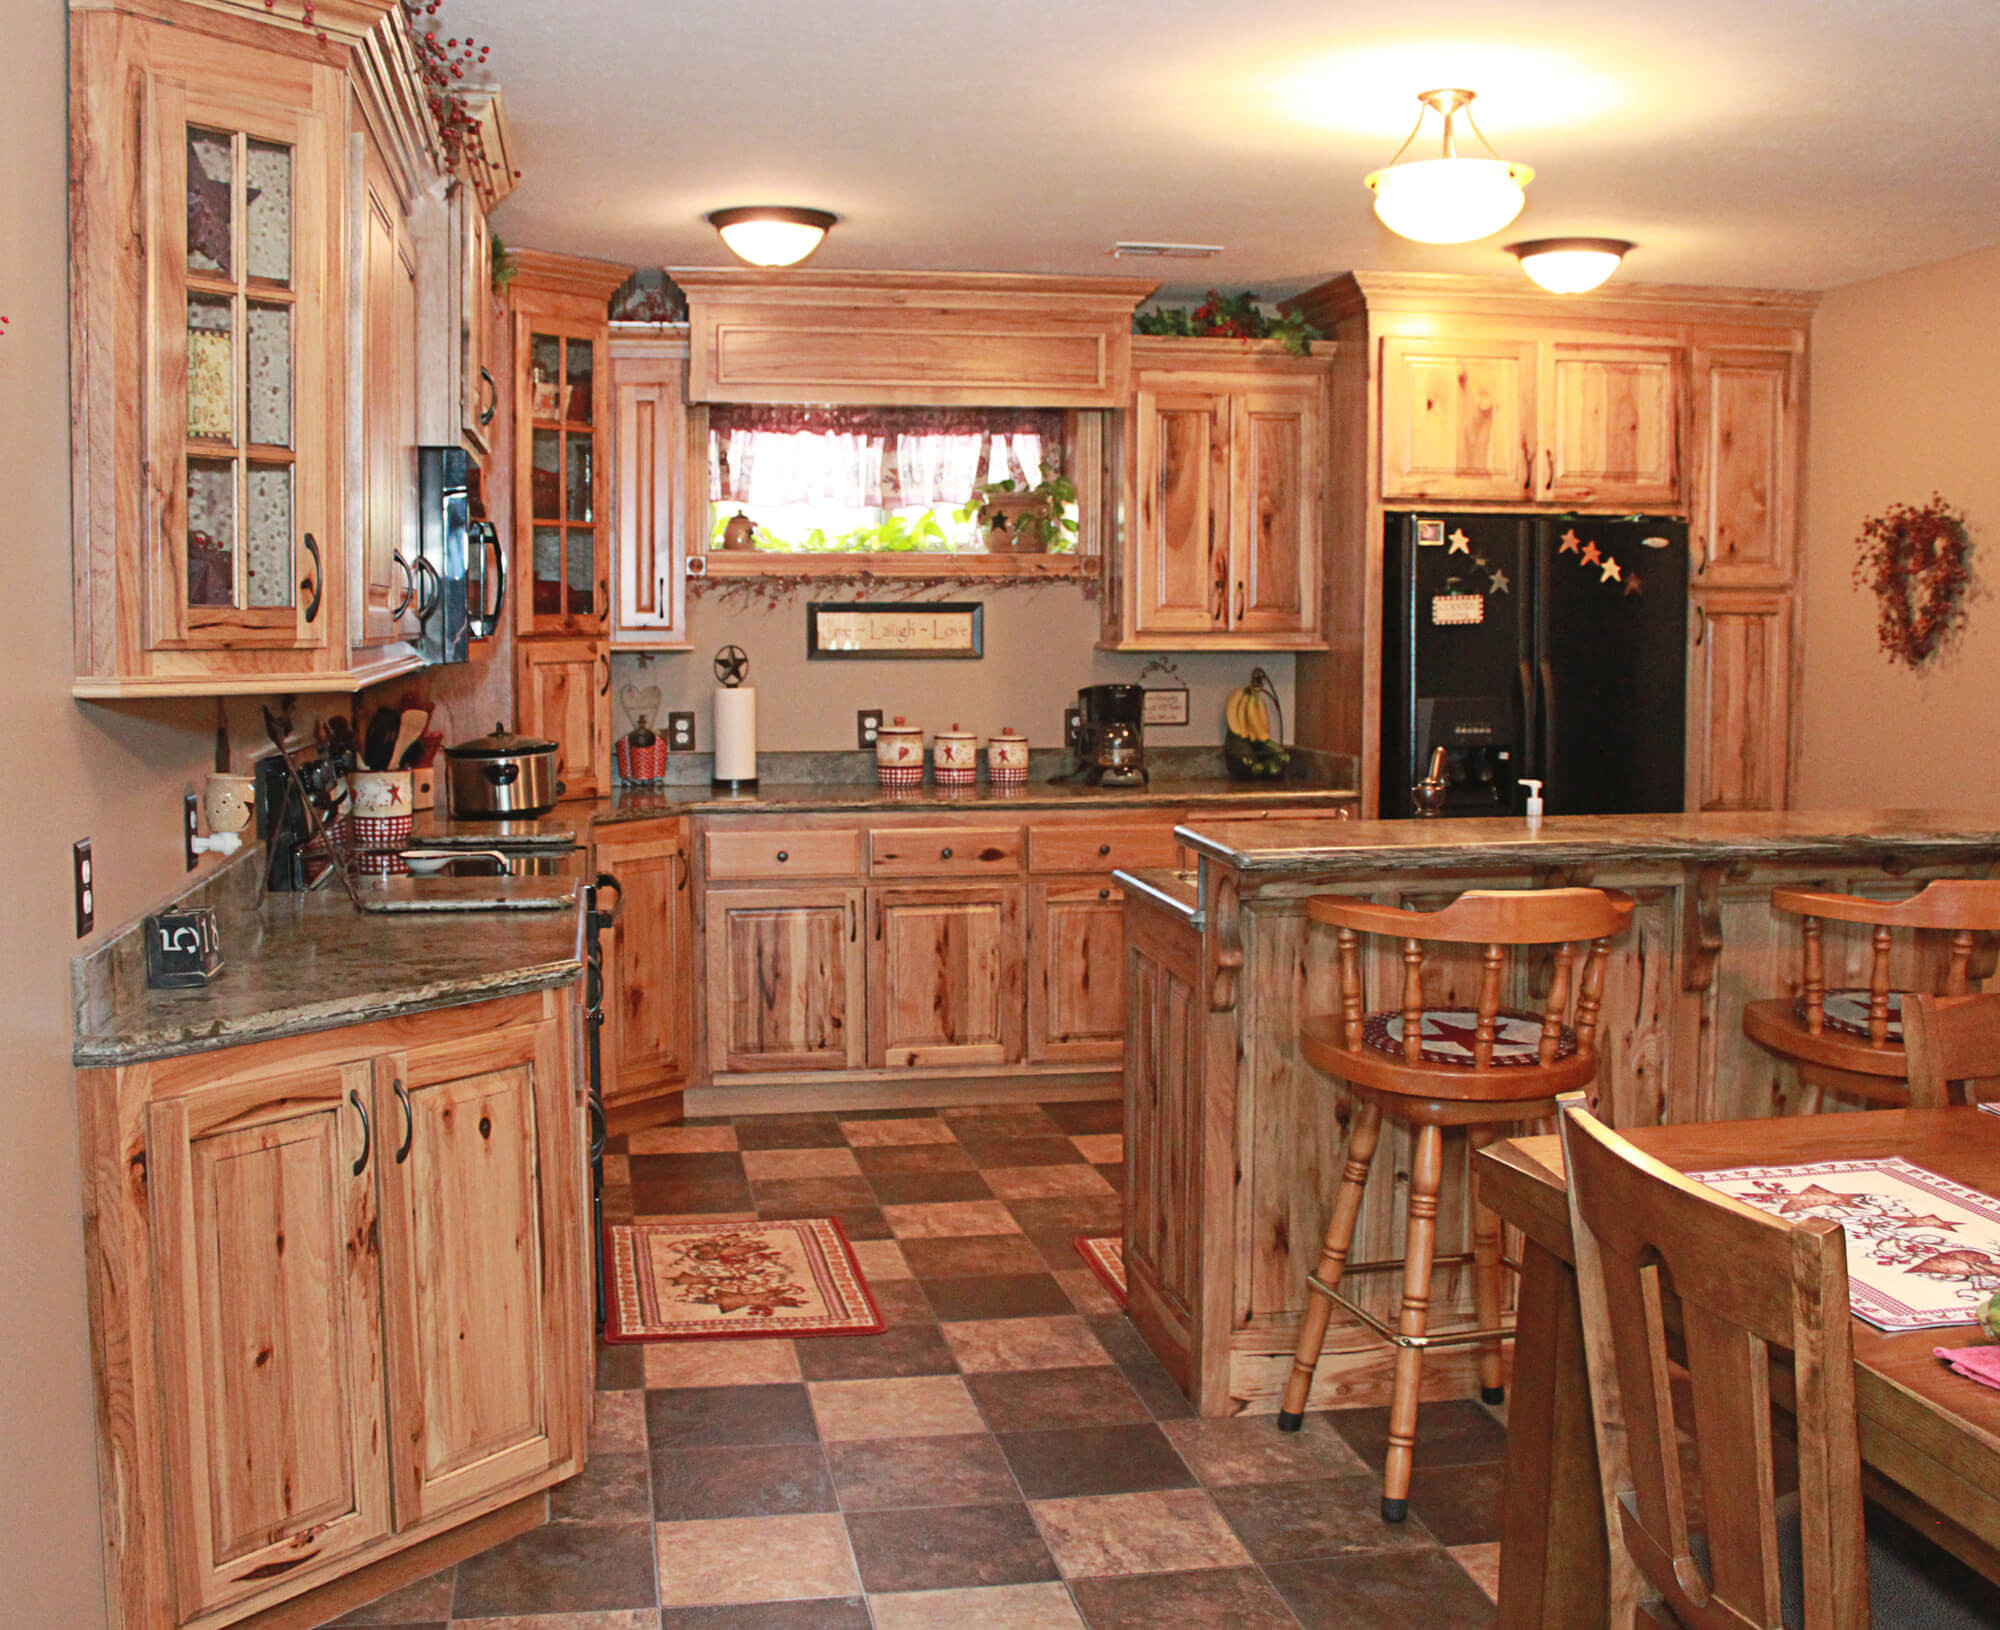 Rustic Kitchen Cabinet Ideas
 Hickory Kitchen Cabinets Natural Characteristic Materials